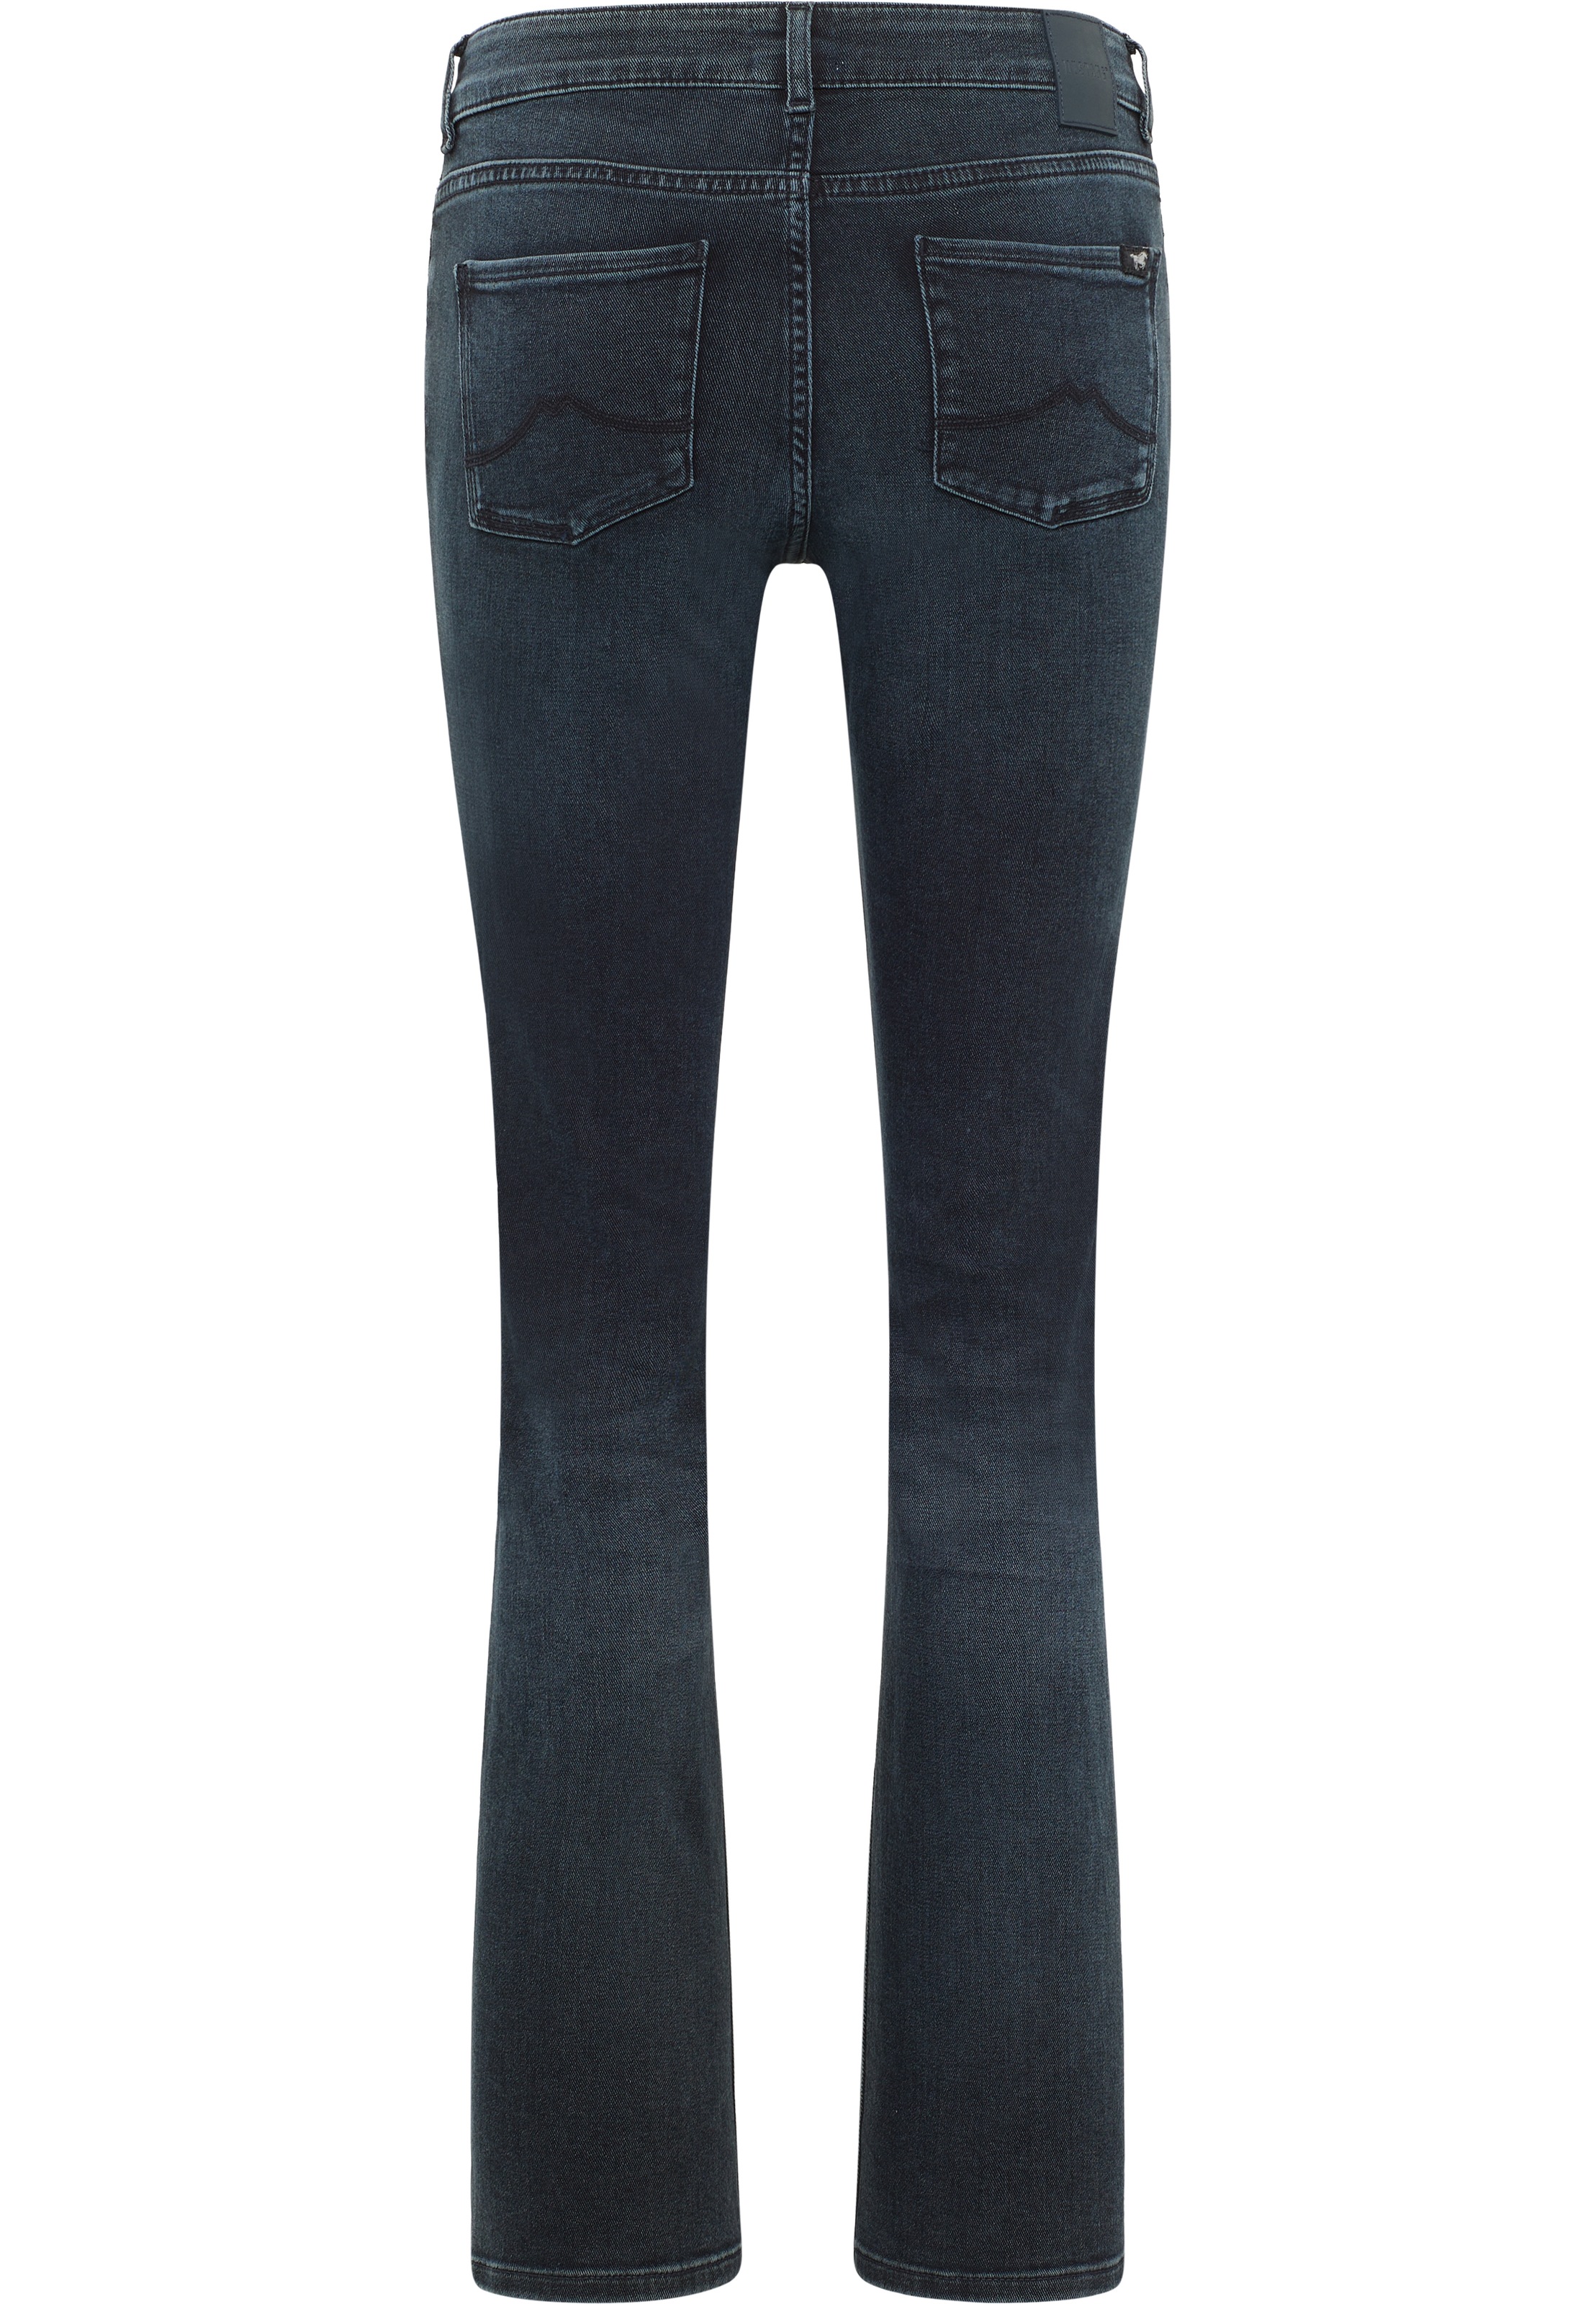 MUSTANG Straight-Jeans Shop Crosby OTTO im kaufen »Style Relaxed Straight« Online